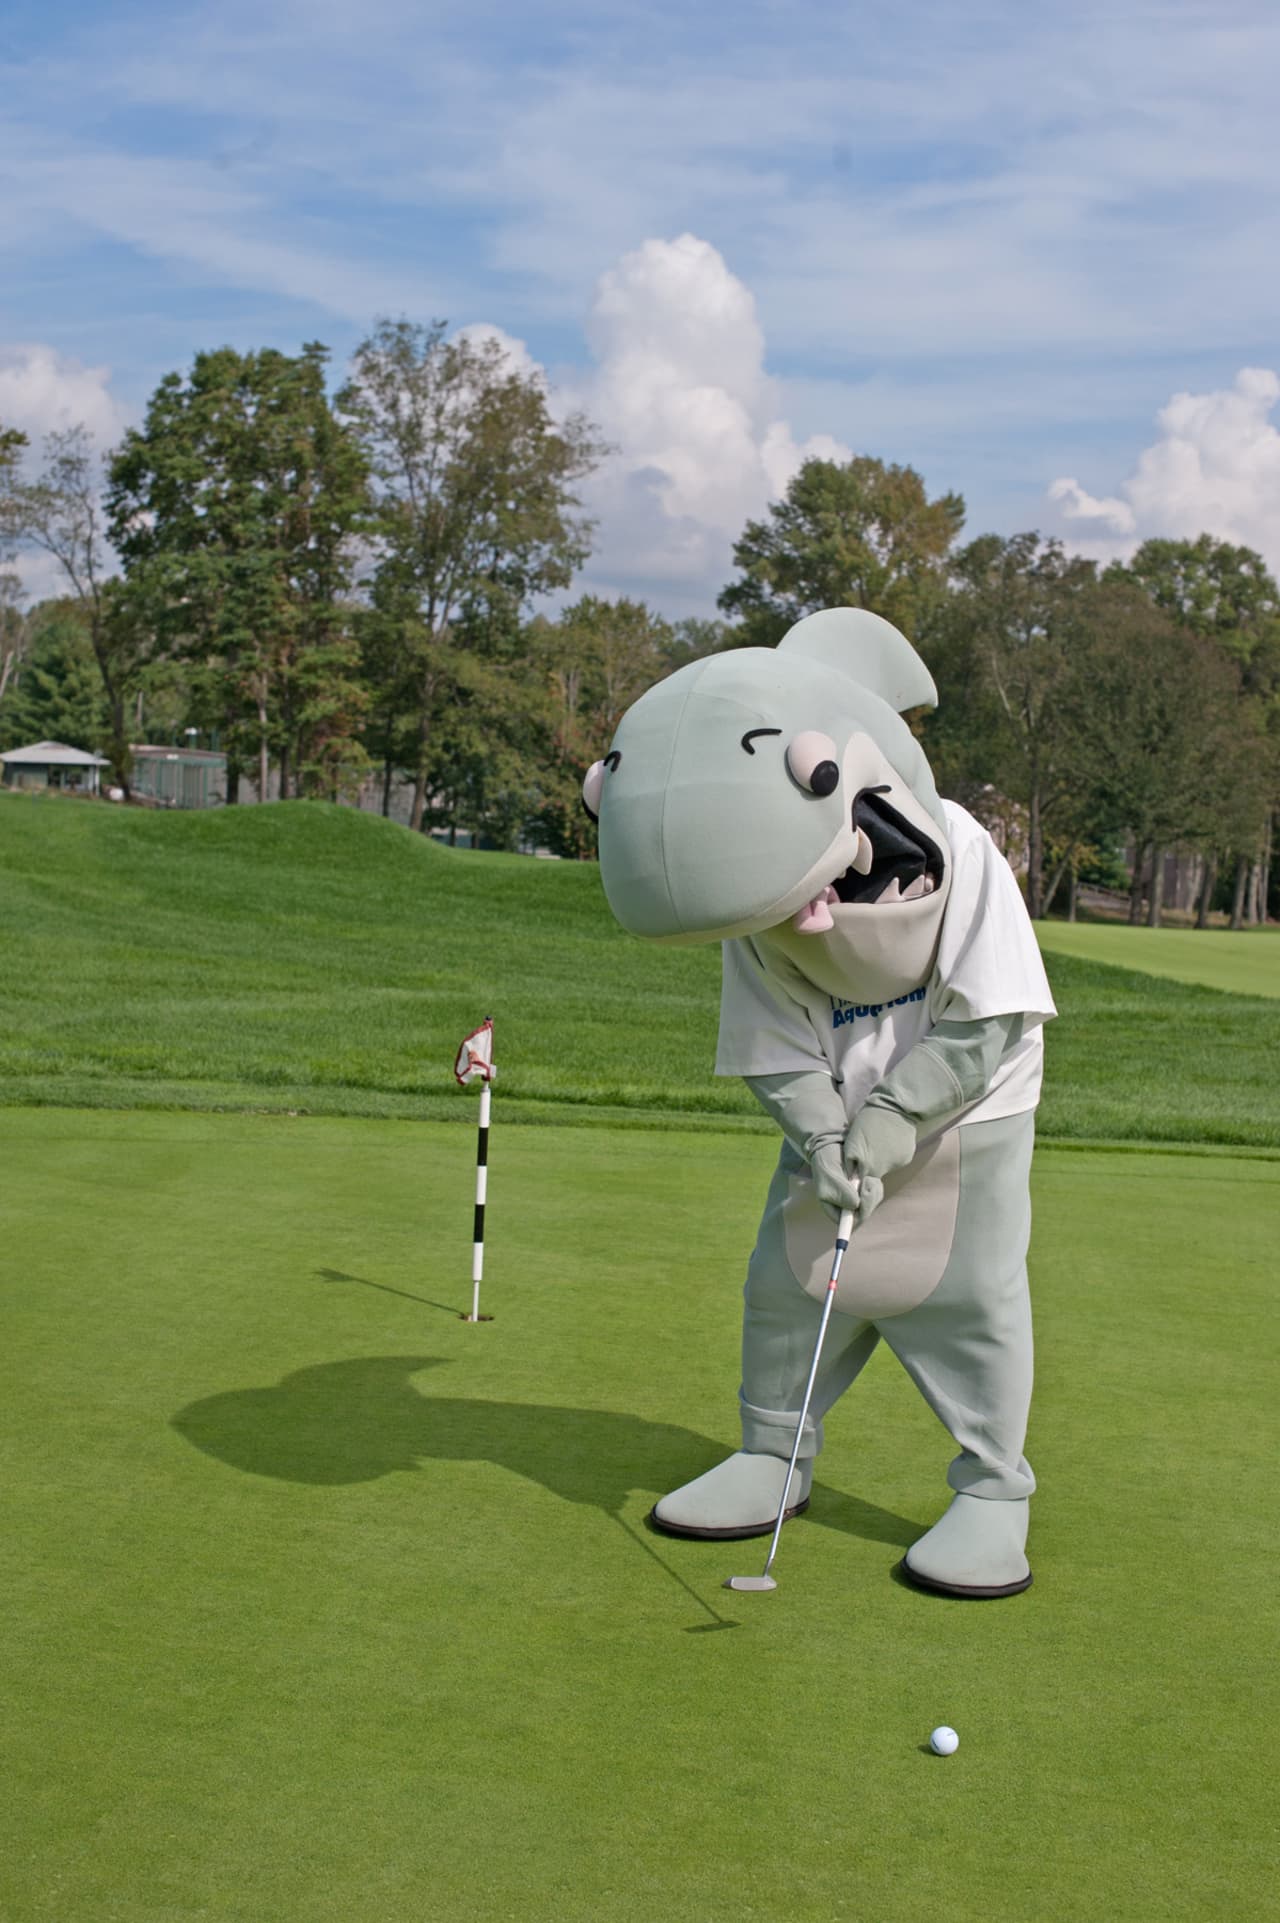 Join Sharky Oct. 5 at the Wee Burn Country Club in Darien for The Maritime Aquarium at Norwalks 5th Maritime Golf Classic.  